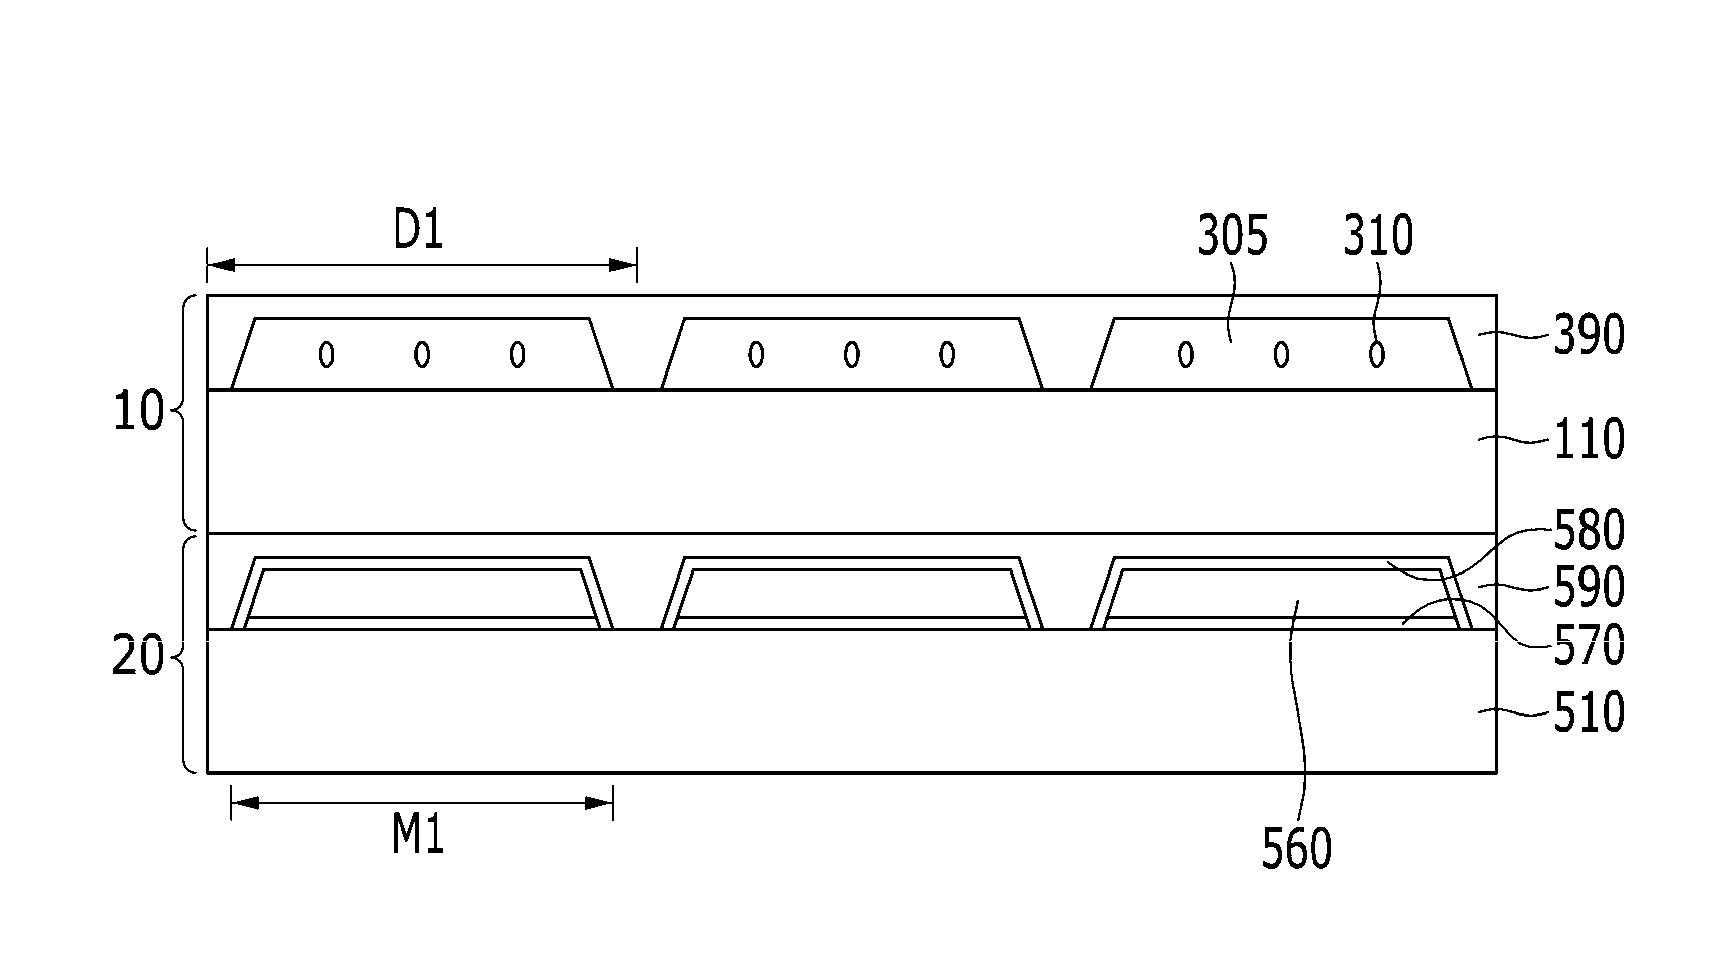 Display devices